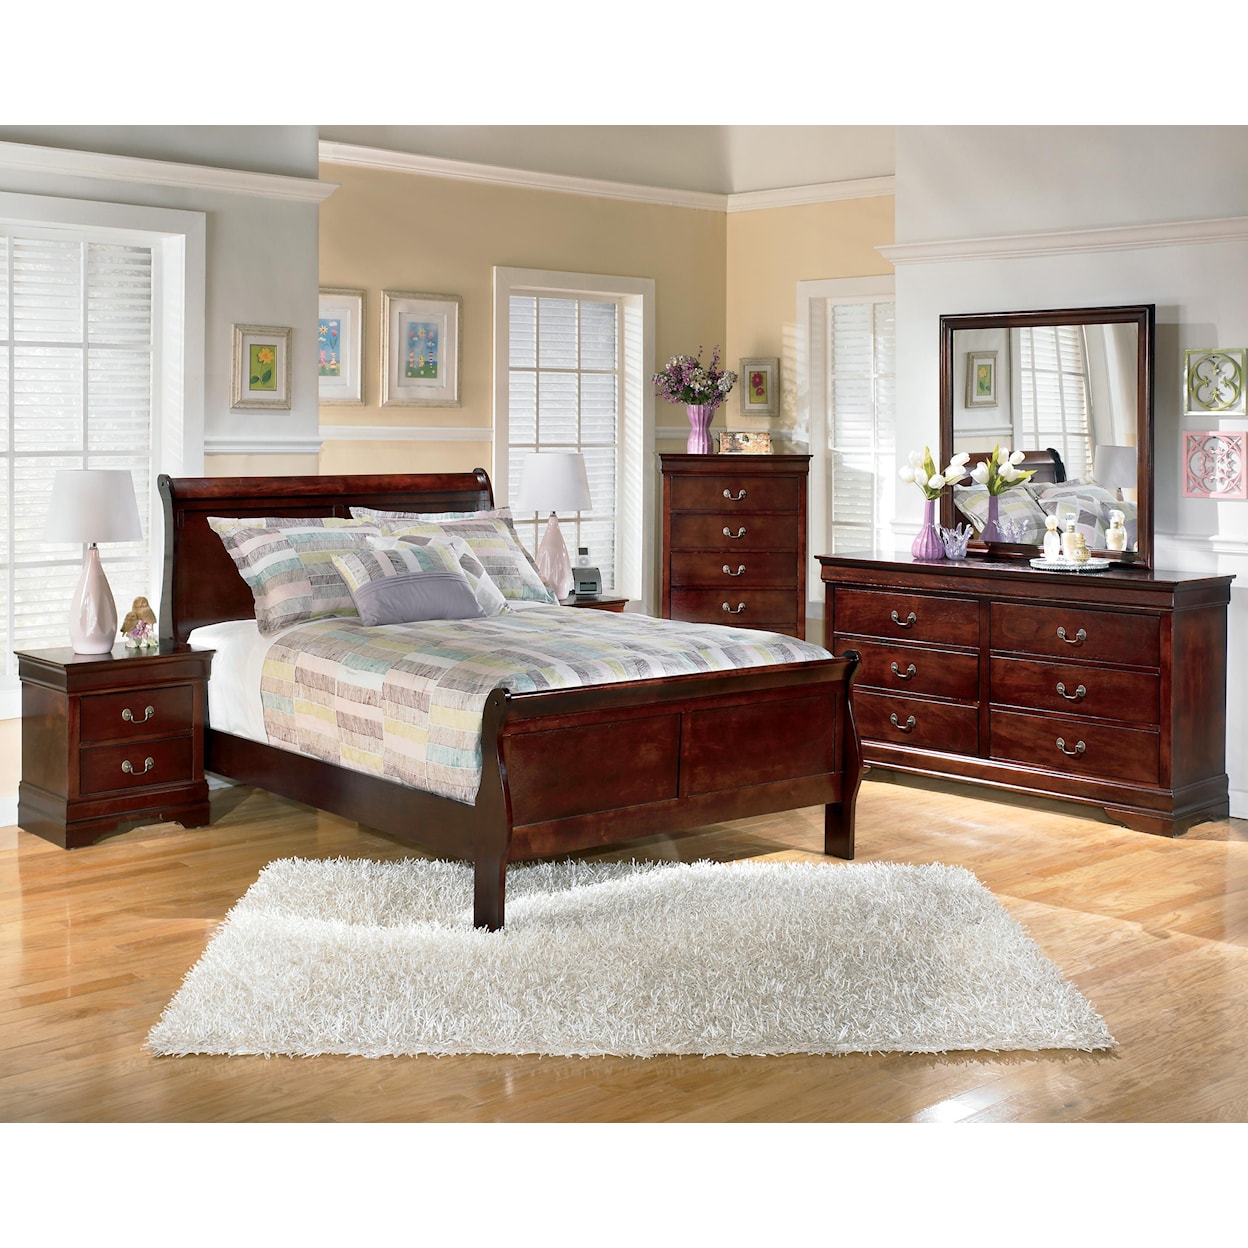 Signature Design by Ashley Alisdair 3 Piece Full Bedroom Group